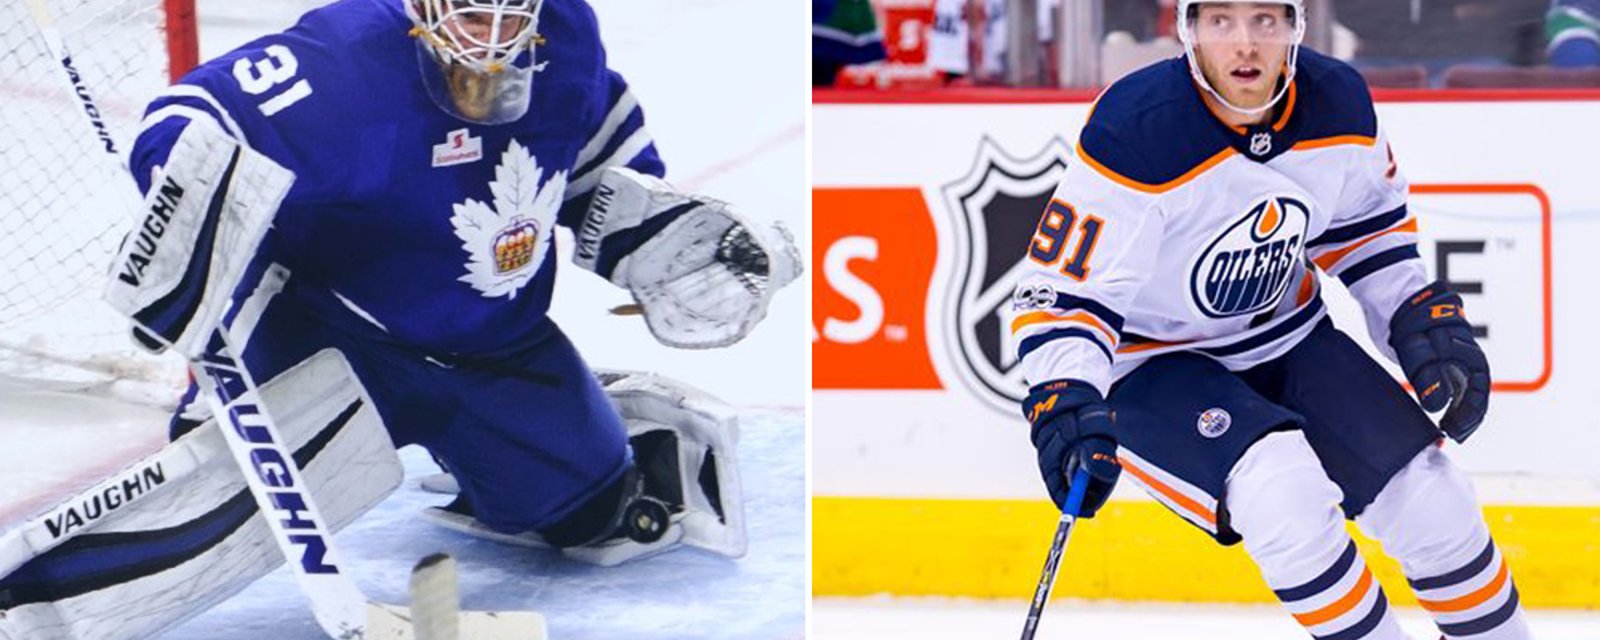 Rumor: Pickard to the Oilers?